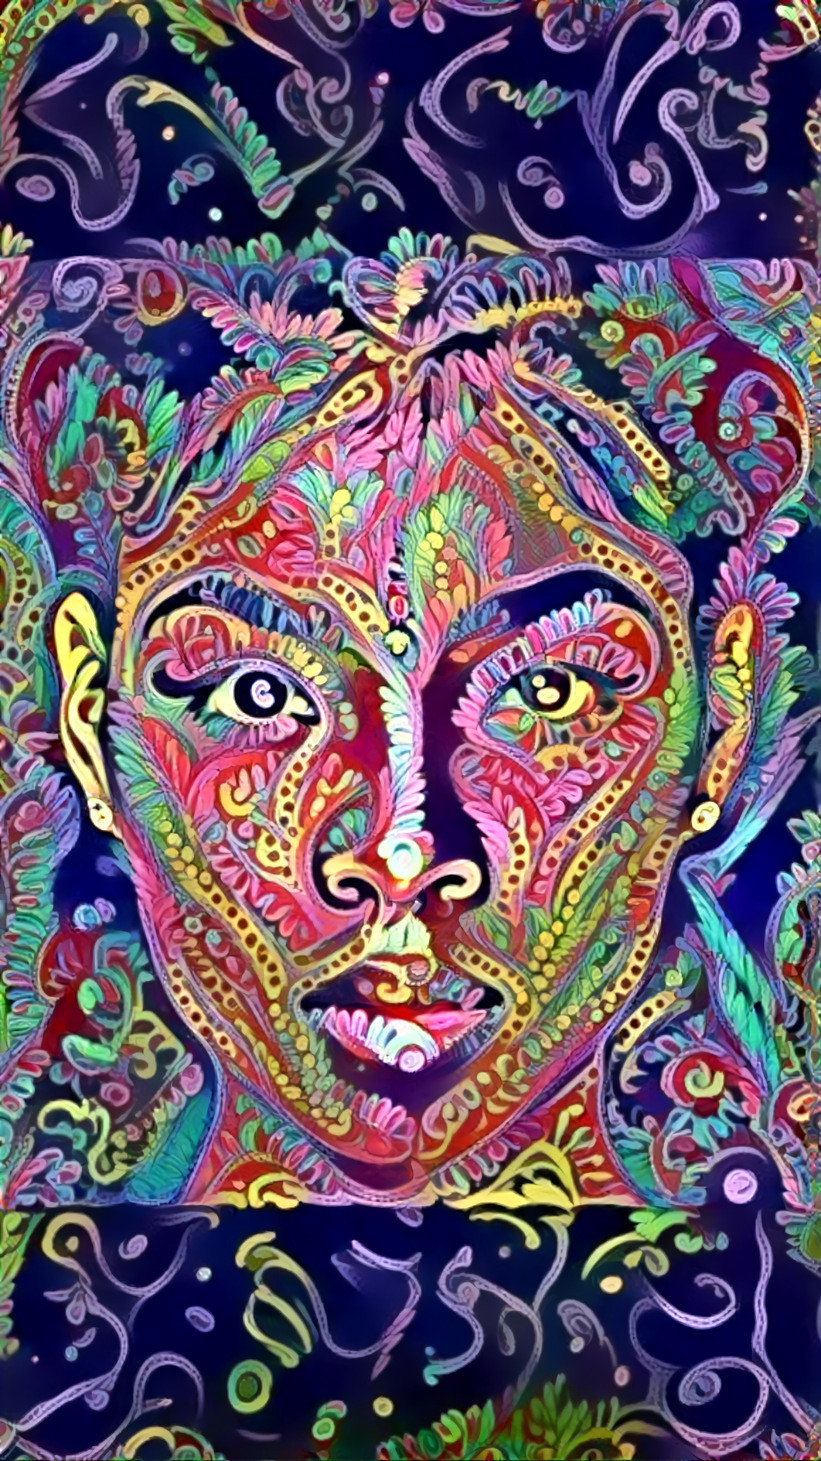 “Abstract Woman”